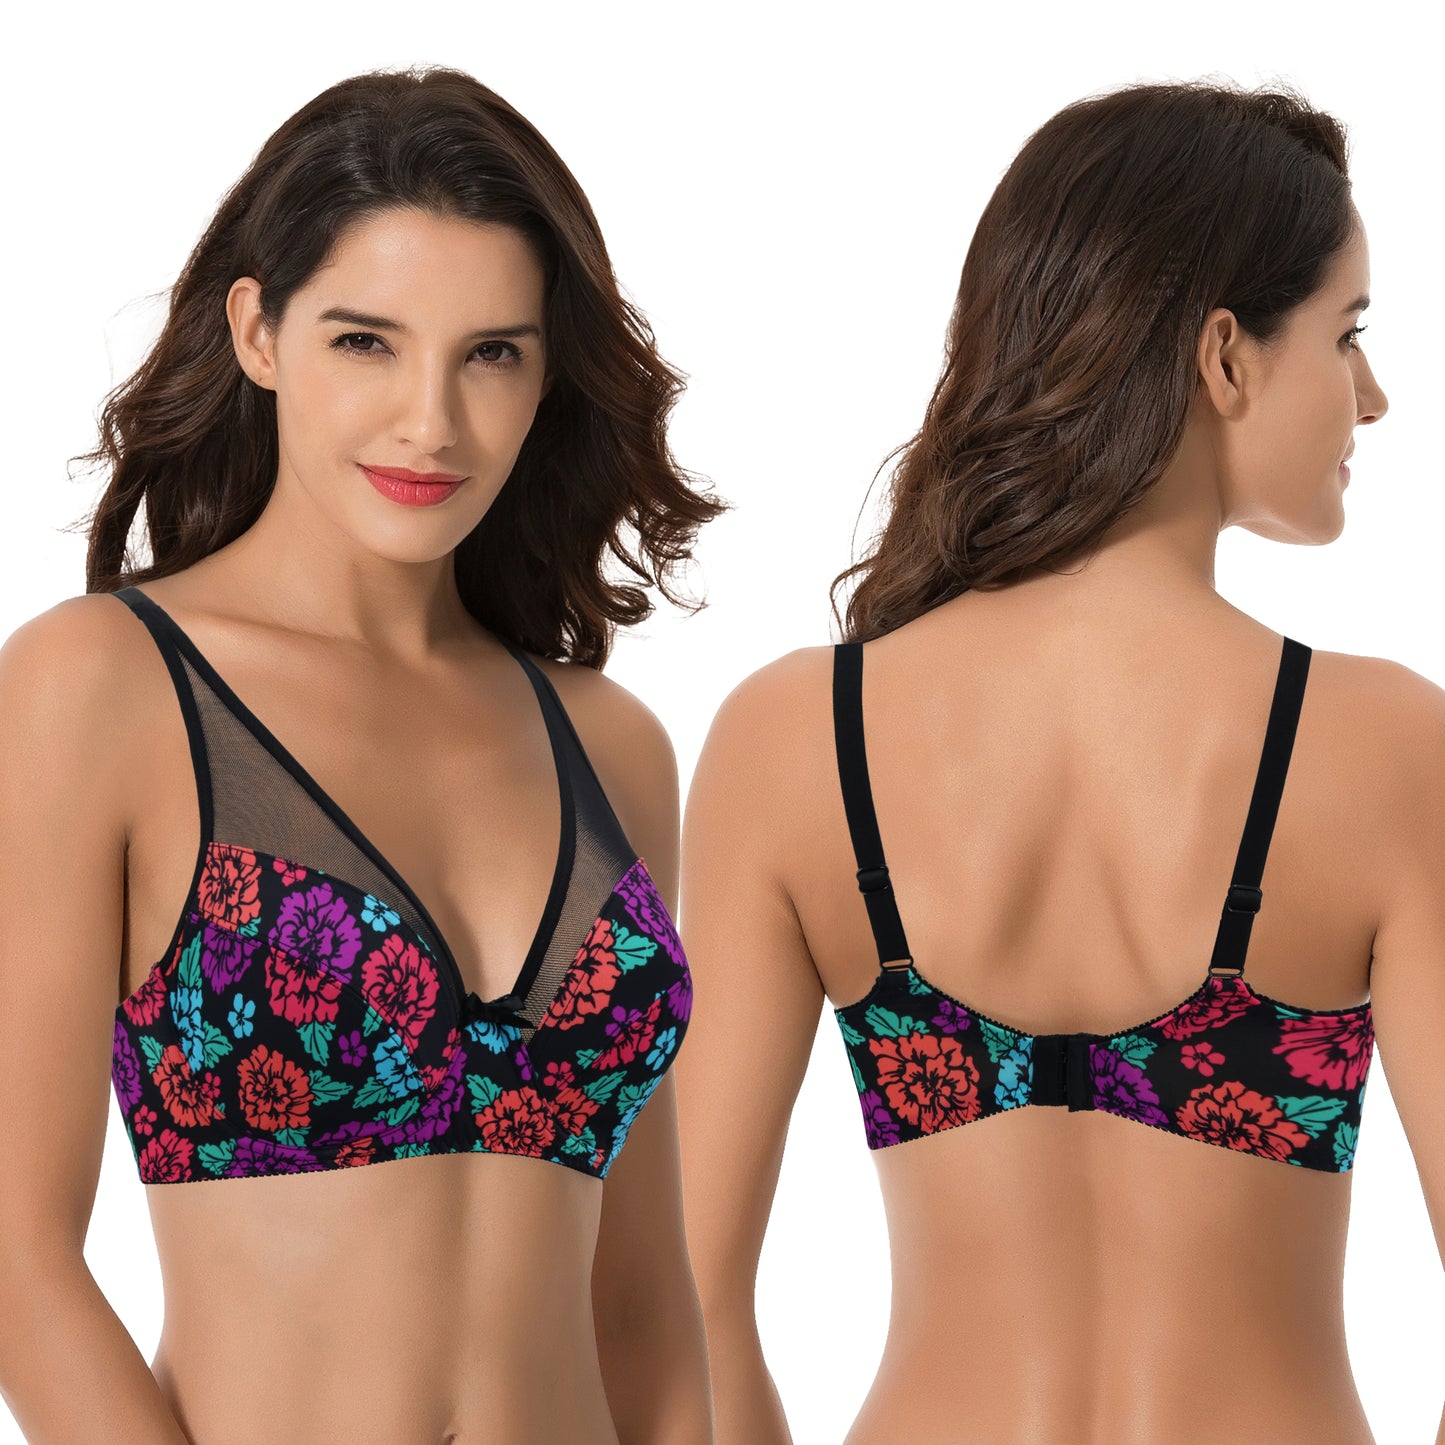 Plus Size Minimizer Underwire Bra with Floral and leopard Print-2pack